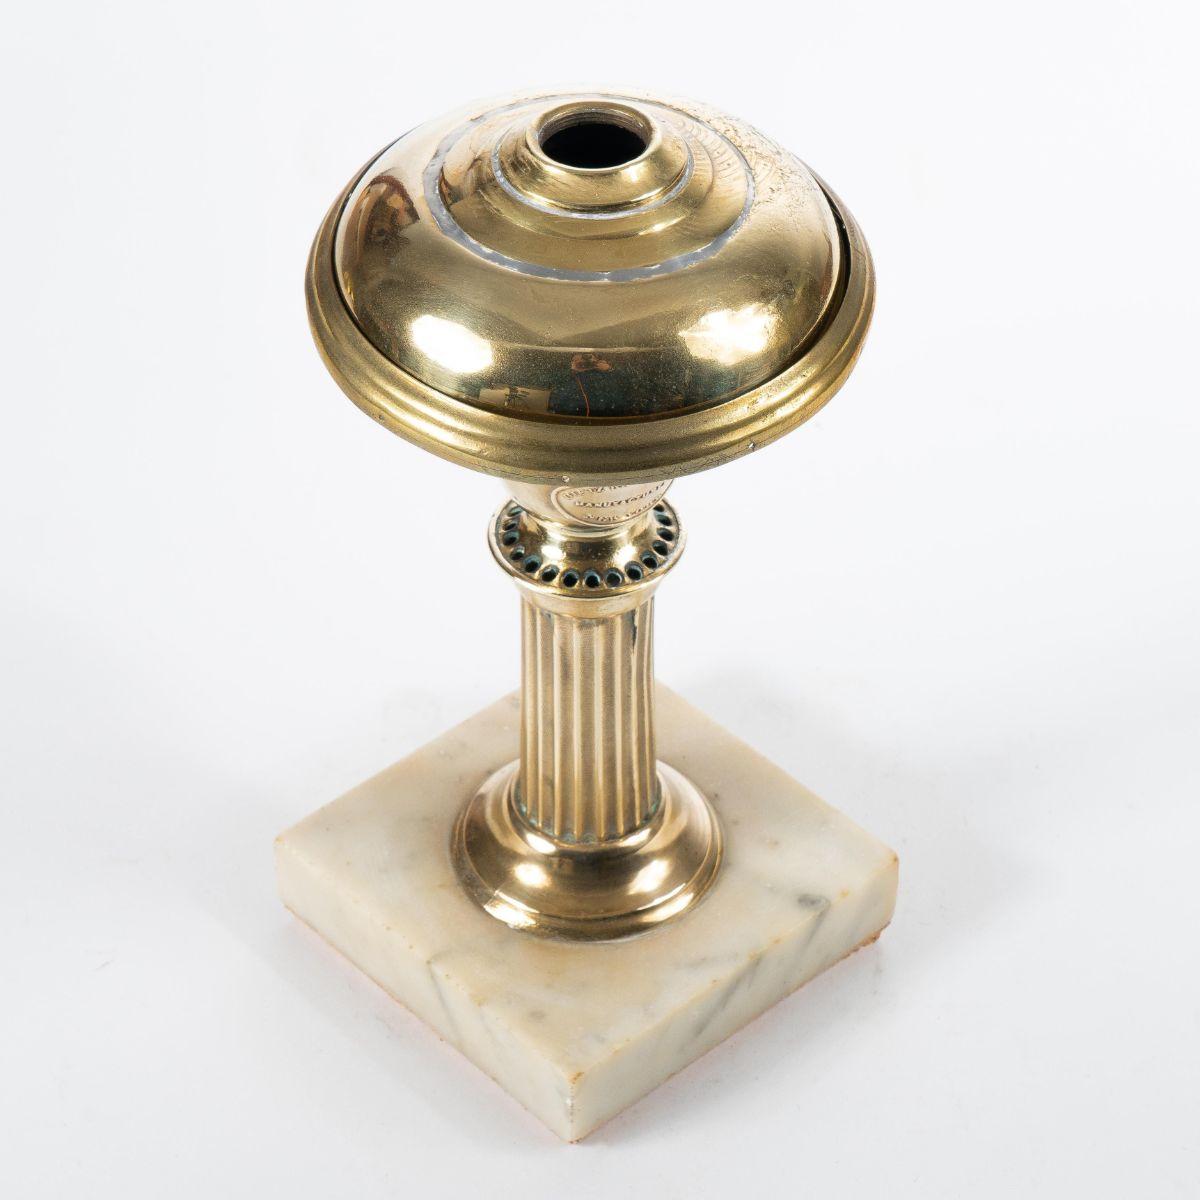 Small brass and marble solar lamp bearing the brass label of Dietz & Co.
America, New York, circa 1840.